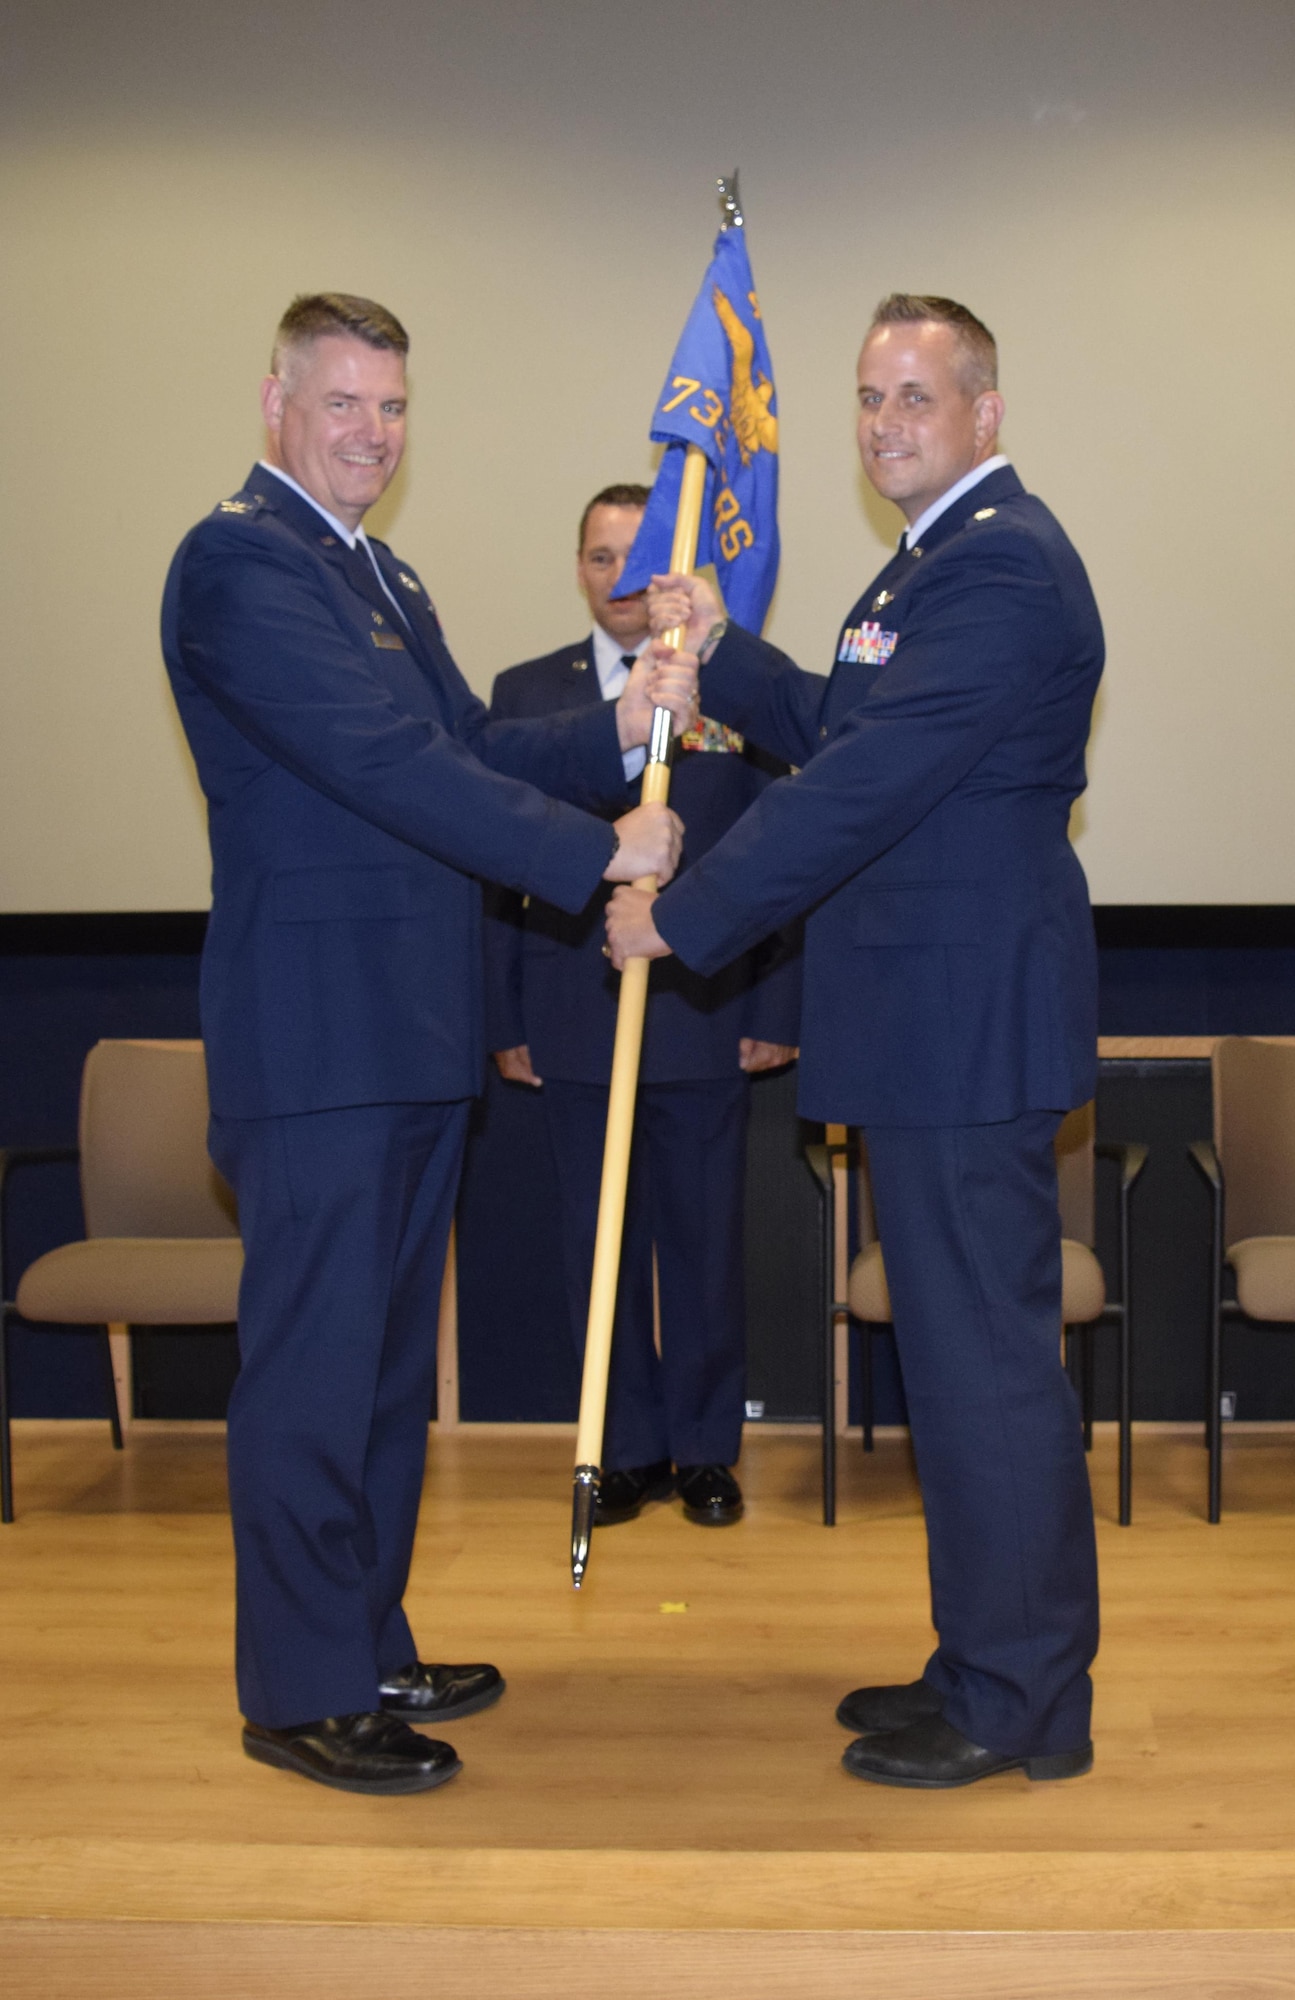 Col. Gregory P. Hayes, 433rd Operations Group commander (left), presents the 733rd Training Squadron guidon to new commander, Lt. Col. Marc Mulkey, during the 733rd TRS Change of Command Ceremony at Joint Base San Antonio-Lackland, Texas, Oct. 16, 2016. Mulkey comes to the 733rd TRS after having served as commander of the 68th Airlift Squadron over the last two years. (U.S. Air Force photo by Tech. Sgt. Lindsey Maurice)